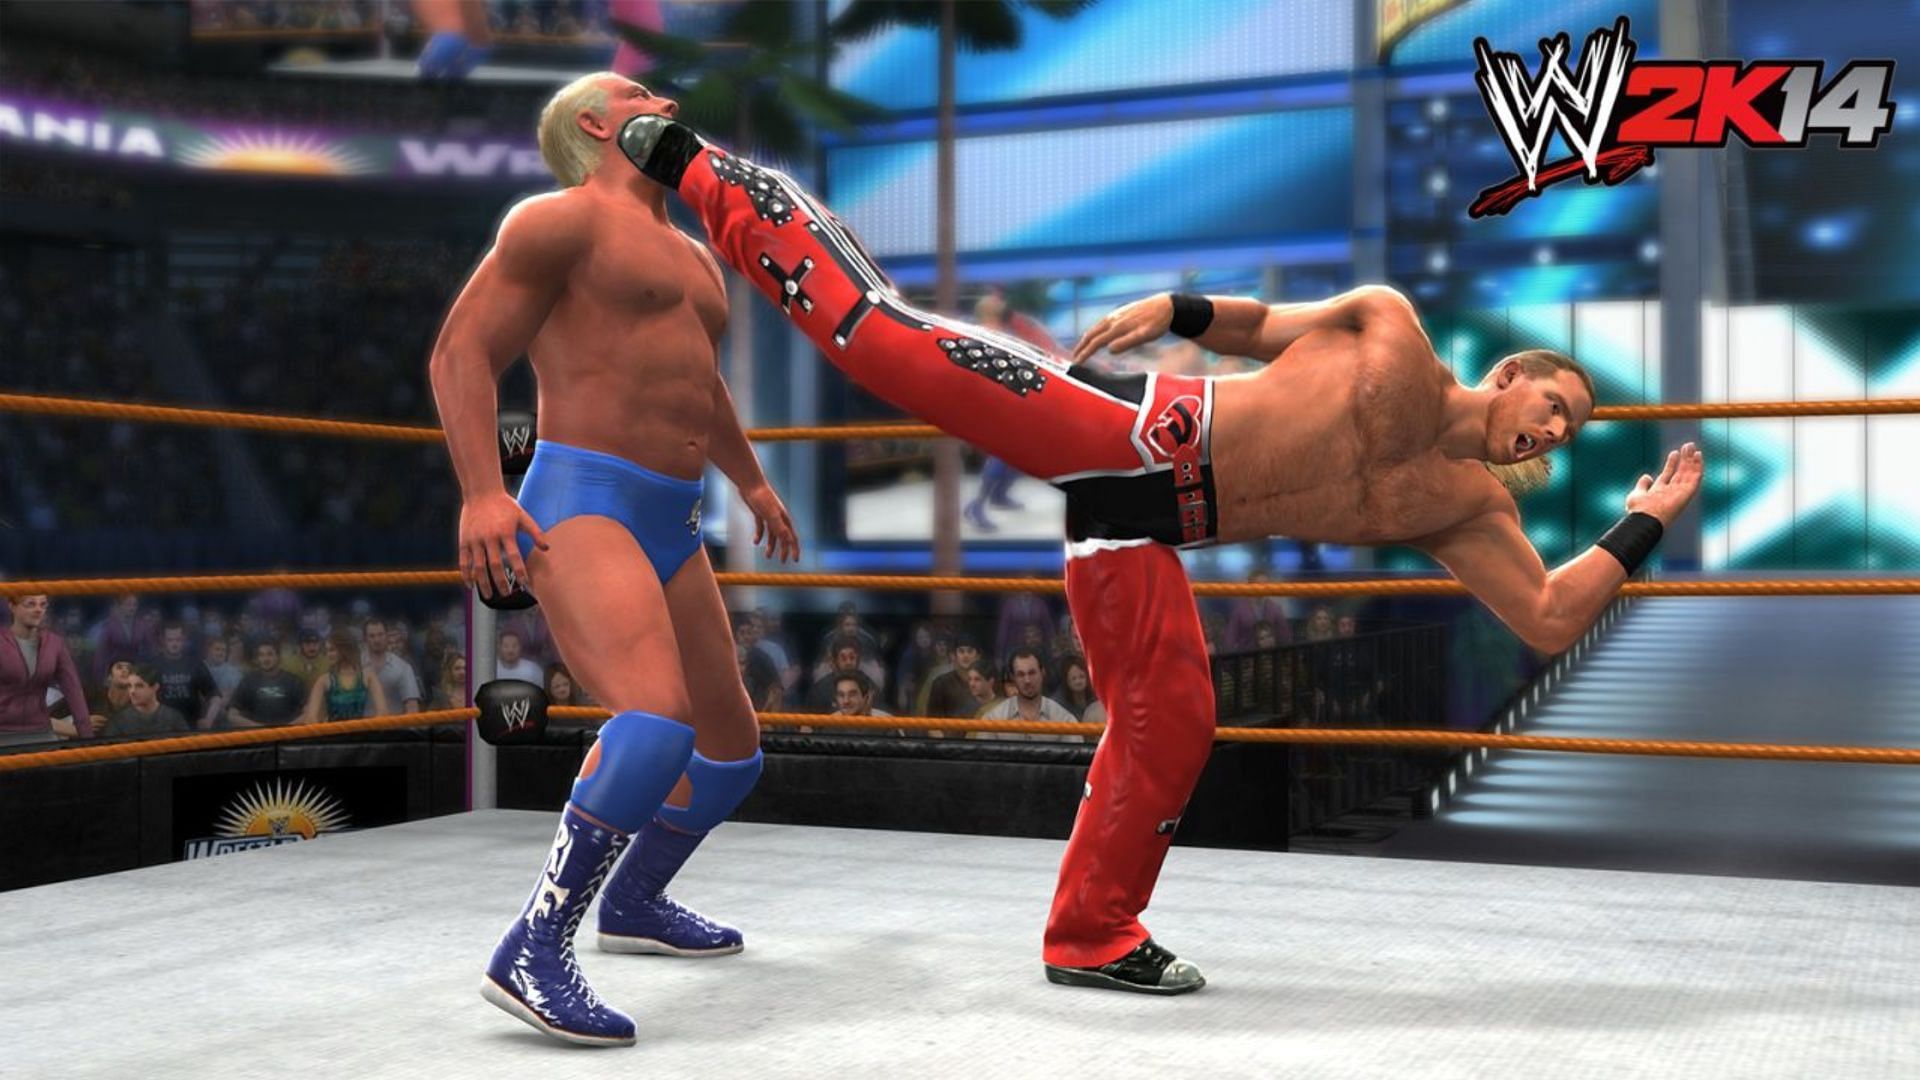 WWE 2K14 features wrestlers from the Attitude Era (Image via 2K)